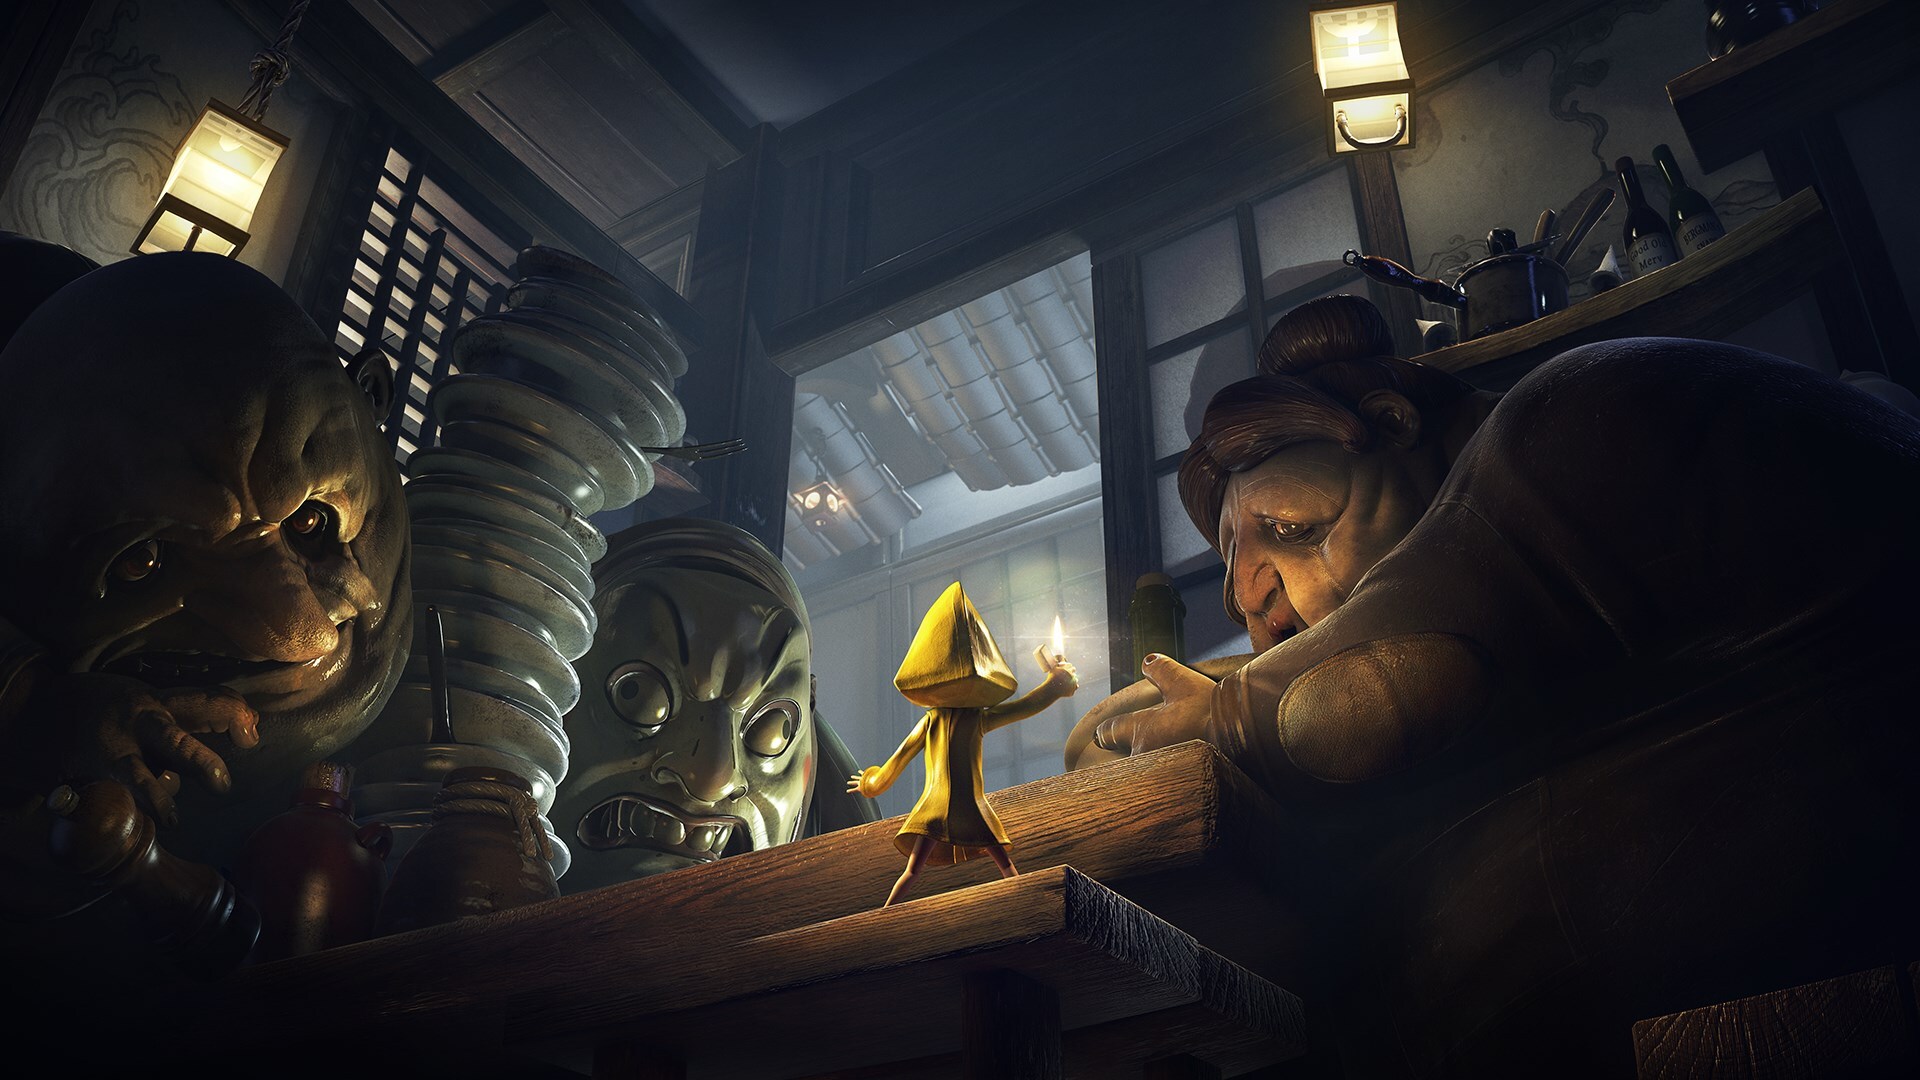 TRAILER: The Cute And Creepy World Of Little Nightmares Comes To Mobile